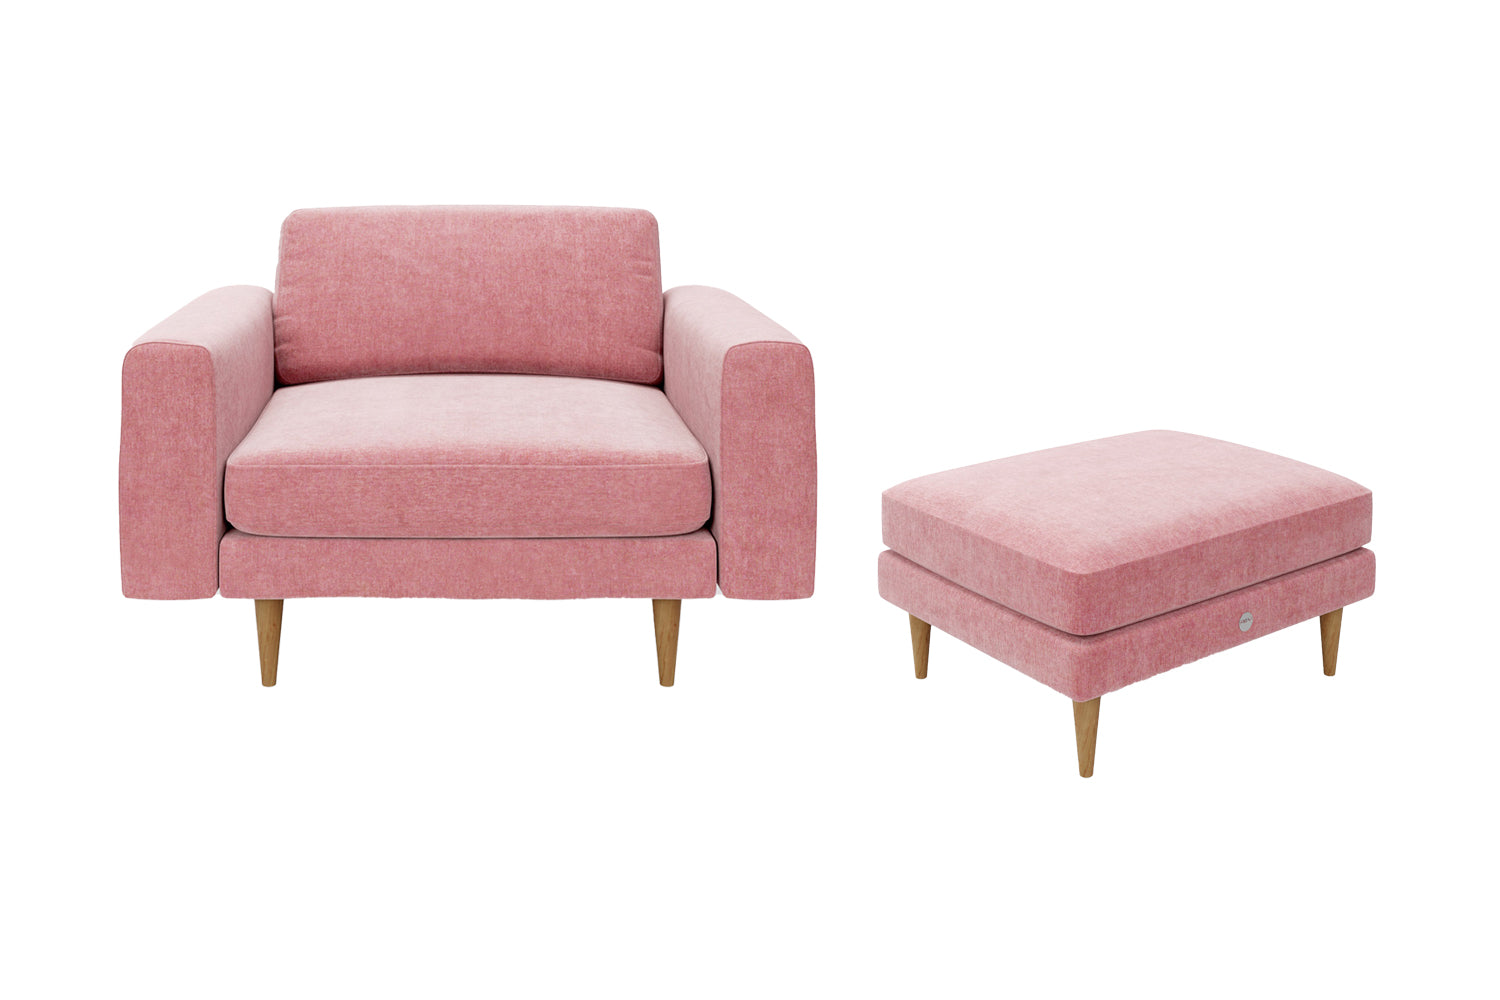 The Big Chill - 1.5 Seater Snuggler and Footstool Set - Blush Coral